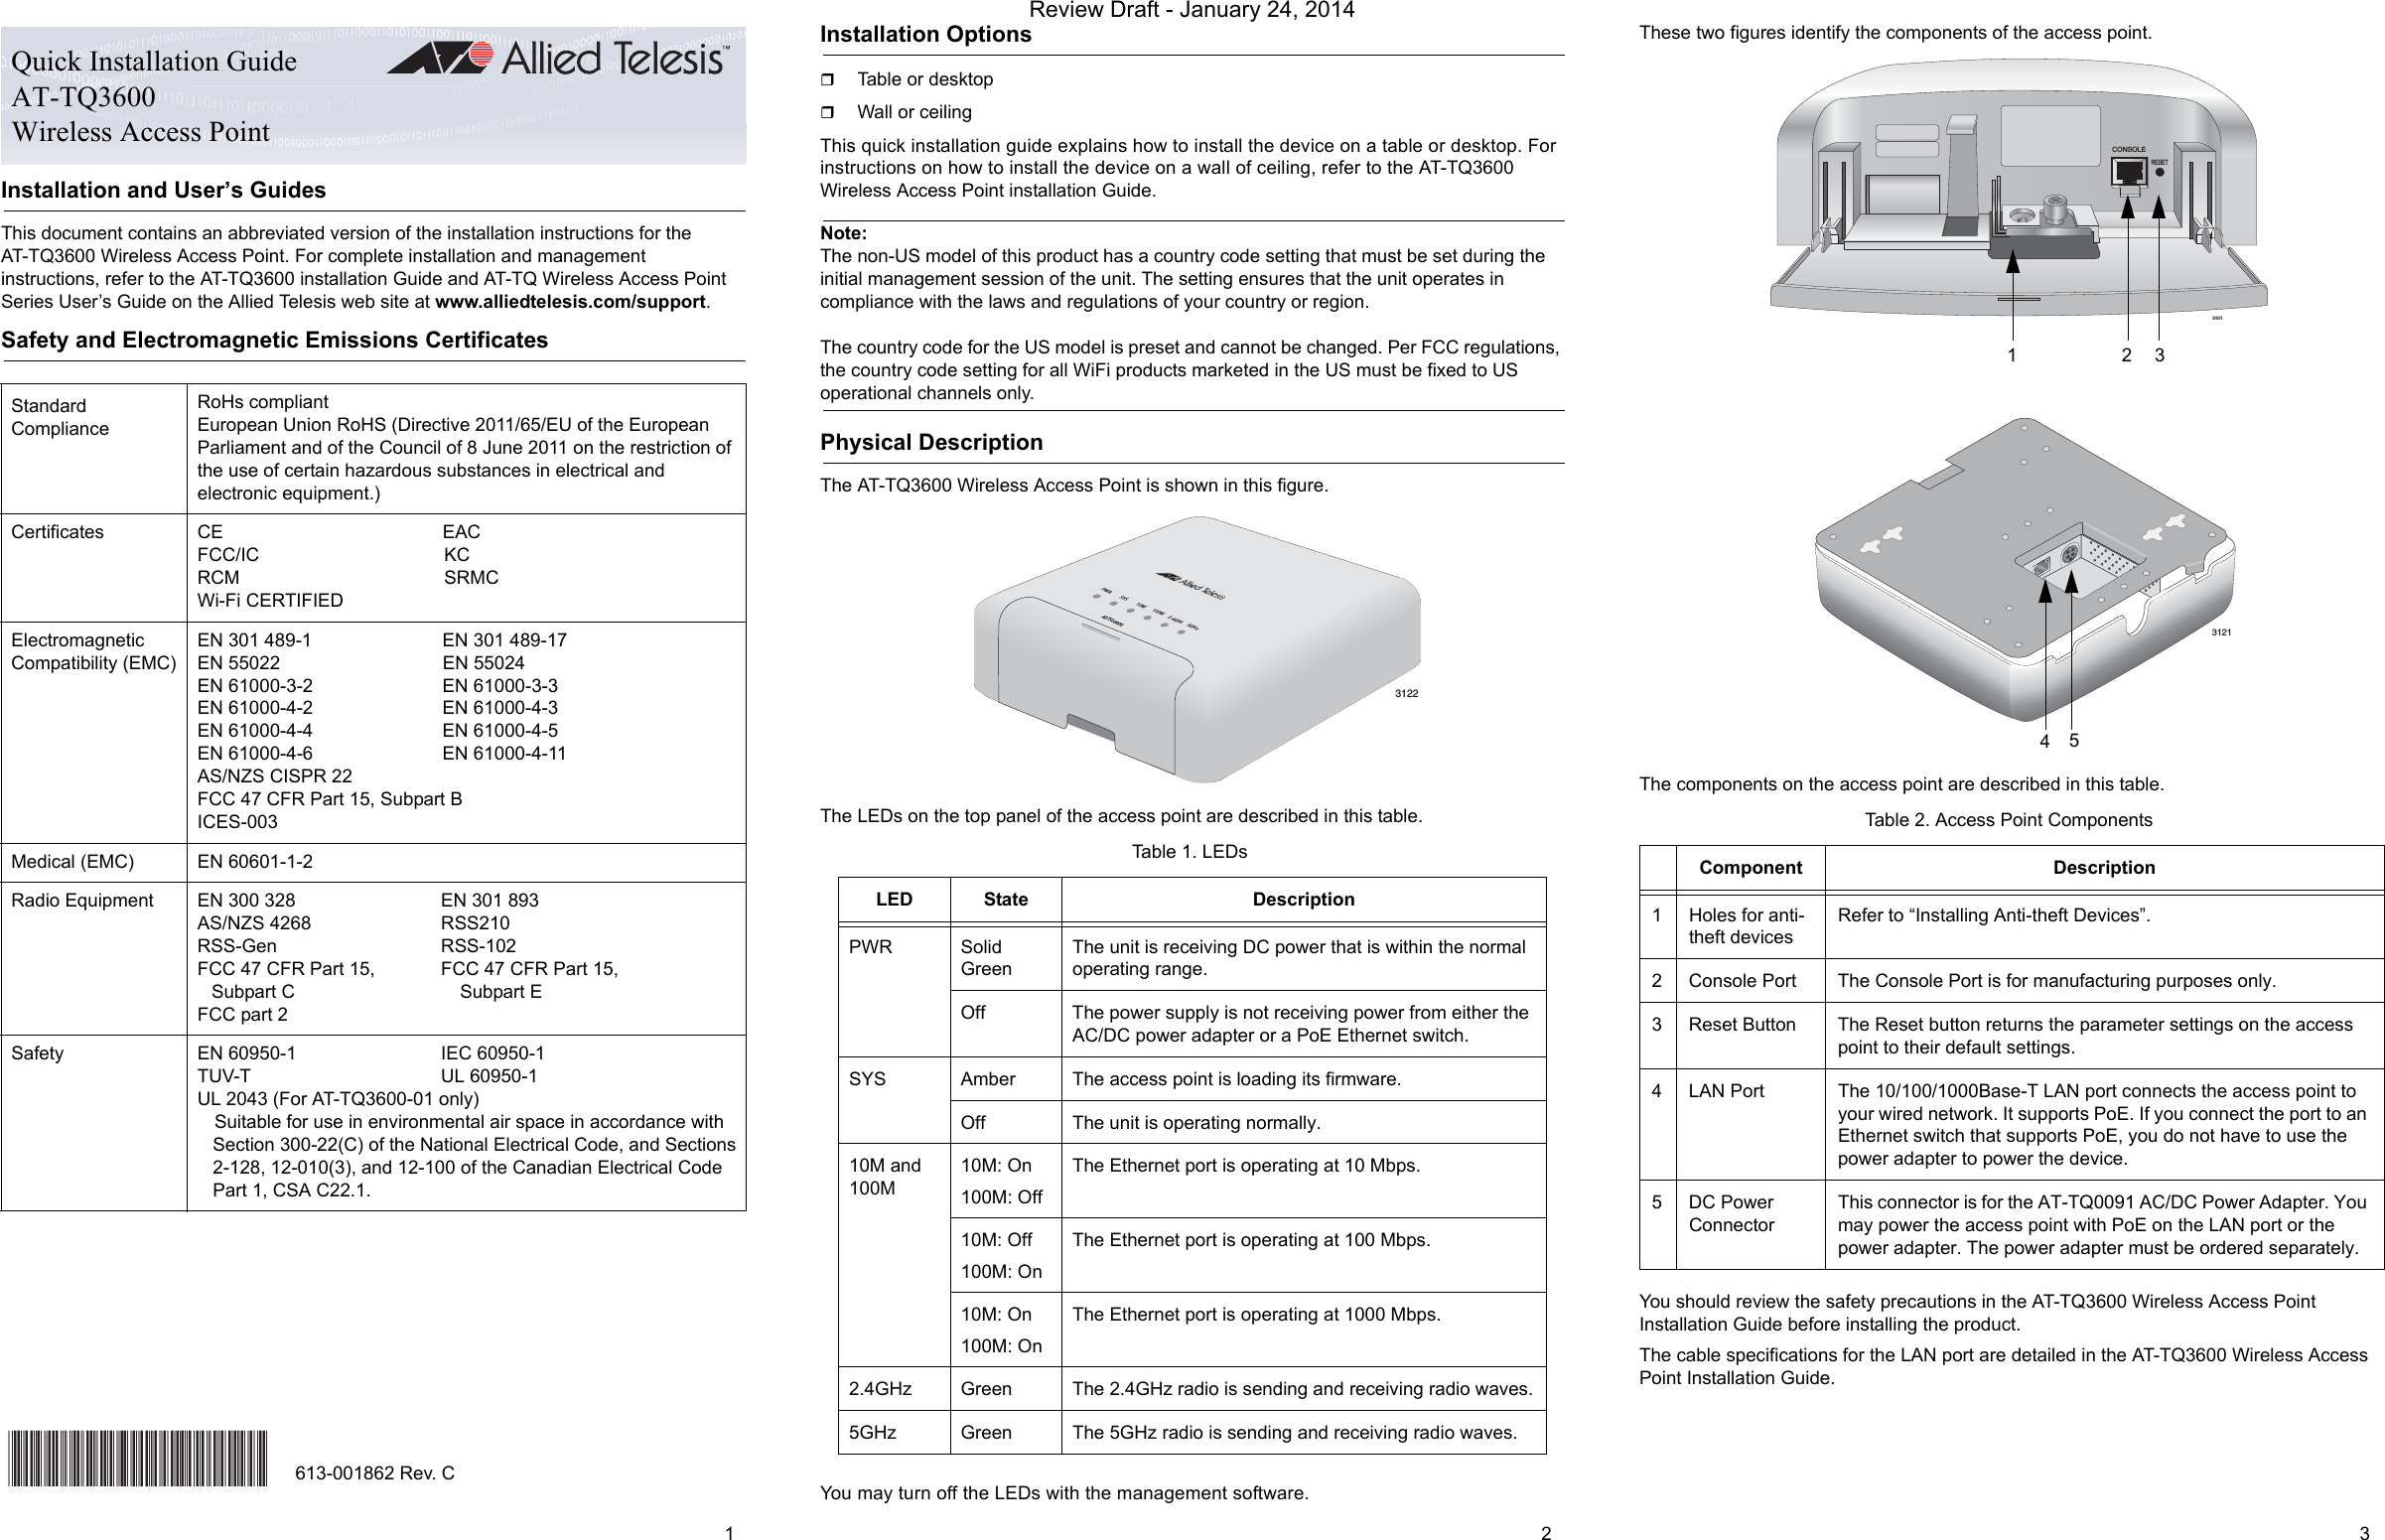 Installation and User’s GuidesThis document contains an abbreviated version of the installation instructions for the AT-TQ3600 Wireless Access Point. For complete installation and management instructions, refer to the AT-TQ3600 installation Guide and AT-TQ Wireless Access Point Series User’s Guide on the Allied Telesis web site at www.alliedtelesis.com/support.Safety and Electromagnetic Emissions CertificatesInstallation OptionsTable or desktopWall or ceilingThis quick installation guide explains how to install the device on a table or desktop. For instructions on how to install the device on a wall of ceiling, refer to the AT-TQ3600 Wireless Access Point installation Guide.Note:The non-US model of this product has a country code setting that must be set during the initial management session of the unit. The setting ensures that the unit operates in compliance with the laws and regulations of your country or region.The country code for the US model is preset and cannot be changed. Per FCC regulations, the country code setting for all WiFi products marketed in the US must be fixed to US operational channels only.Physical DescriptionThe AT-TQ3600 Wireless Access Point is shown in this figure.The LEDs on the top panel of the access point are described in this table.You may turn off the LEDs with the management software.These two figures identify the components of the access point.The components on the access point are described in this table.You should review the safety precautions in the AT-TQ3600 Wireless Access Point Installation Guide before installing the product.The cable specifications for the LAN port are detailed in the AT-TQ3600 Wireless Access Point Installation Guide.Standard ComplianceRoHs compliantEuropean Union RoHS (Directive 2011/65/EU of the European Parliament and of the Council of 8 June 2011 on the restriction of the use of certain hazardous substances in electrical and electronic equipment.)Certificates CE EACFCC/IC KCRCM SRMCWi-Fi CERTIFIEDElectromagnetic Compatibility (EMC)EN 301 489-1 EN 301 489-17EN 55022 EN 55024EN 61000-3-2 EN 61000-3-3EN 61000-4-2 EN 61000-4-3EN 61000-4-4 EN 61000-4-5EN 61000-4-6 EN 61000-4-11AS/NZS CISPR 22FCC 47 CFR Part 15, Subpart BICES-003Medical (EMC) EN 60601-1-2Radio Equipment EN 300 328 EN 301 893AS/NZS 4268 RSS210RSS-Gen RSS-102FCC 47 CFR Part 15, FCC 47 CFR Part 15,Subpart C Subpart EFCC part 2Safety EN 60950-1 IEC 60950-1TUV-T UL 60950-1UL 2043 (For AT-TQ3600-01 only)Suitable for use in environmental air space in accordance with Section 300-22(C) of the National Electrical Code, and Sections 2-128, 12-010(3), and 12-100 of the Canadian Electrical Code Part 1, CSA C22.1.Quick Installation GuideAT-TQ3600Wireless Access Point*613-001862 Rev B*613-001862 Rev. CTable 1. LEDsLED State DescriptionPWR Solid GreenThe unit is receiving DC power that is within the normal operating range.Off The power supply is not receiving power from either the AC/DC power adapter or a PoE Ethernet switch.SYS Amber The access point is loading its firmware.Off The unit is operating normally.10M and 100M10M: On100M: OffThe Ethernet port is operating at 10 Mbps.10M: Off100M: OnThe Ethernet port is operating at 100 Mbps.10M: On100M: OnThe Ethernet port is operating at 1000 Mbps.2.4GHz Green The 2.4GHz radio is sending and receiving radio waves.5GHz Green The 5GHz radio is sending and receiving radio waves.PWR SYS 10M 100M 2.4GHz 5GHzAT-TQ36003122Table 2. Access Point ComponentsComponent Description1 Holes for anti-theft devicesRefer to “Installing Anti-theft Devices”.2 Console Port The Console Port is for manufacturing purposes only.3 Reset Button The Reset button returns the parameter settings on the access point to their default settings.4 LAN Port The 10/100/1000Base-T LAN port connects the access point to your wired network. It supports PoE. If you connect the port to an Ethernet switch that supports PoE, you do not have to use the power adapter to power the device.5 DC Power ConnectorThis connector is for the AT-TQ0091 AC/DC Power Adapter. You may power the access point with PoE on the LAN port or the power adapter. The power adapter must be ordered separately.CONSOLERESET31012313121451 2 3Review Draft - January 24, 2014